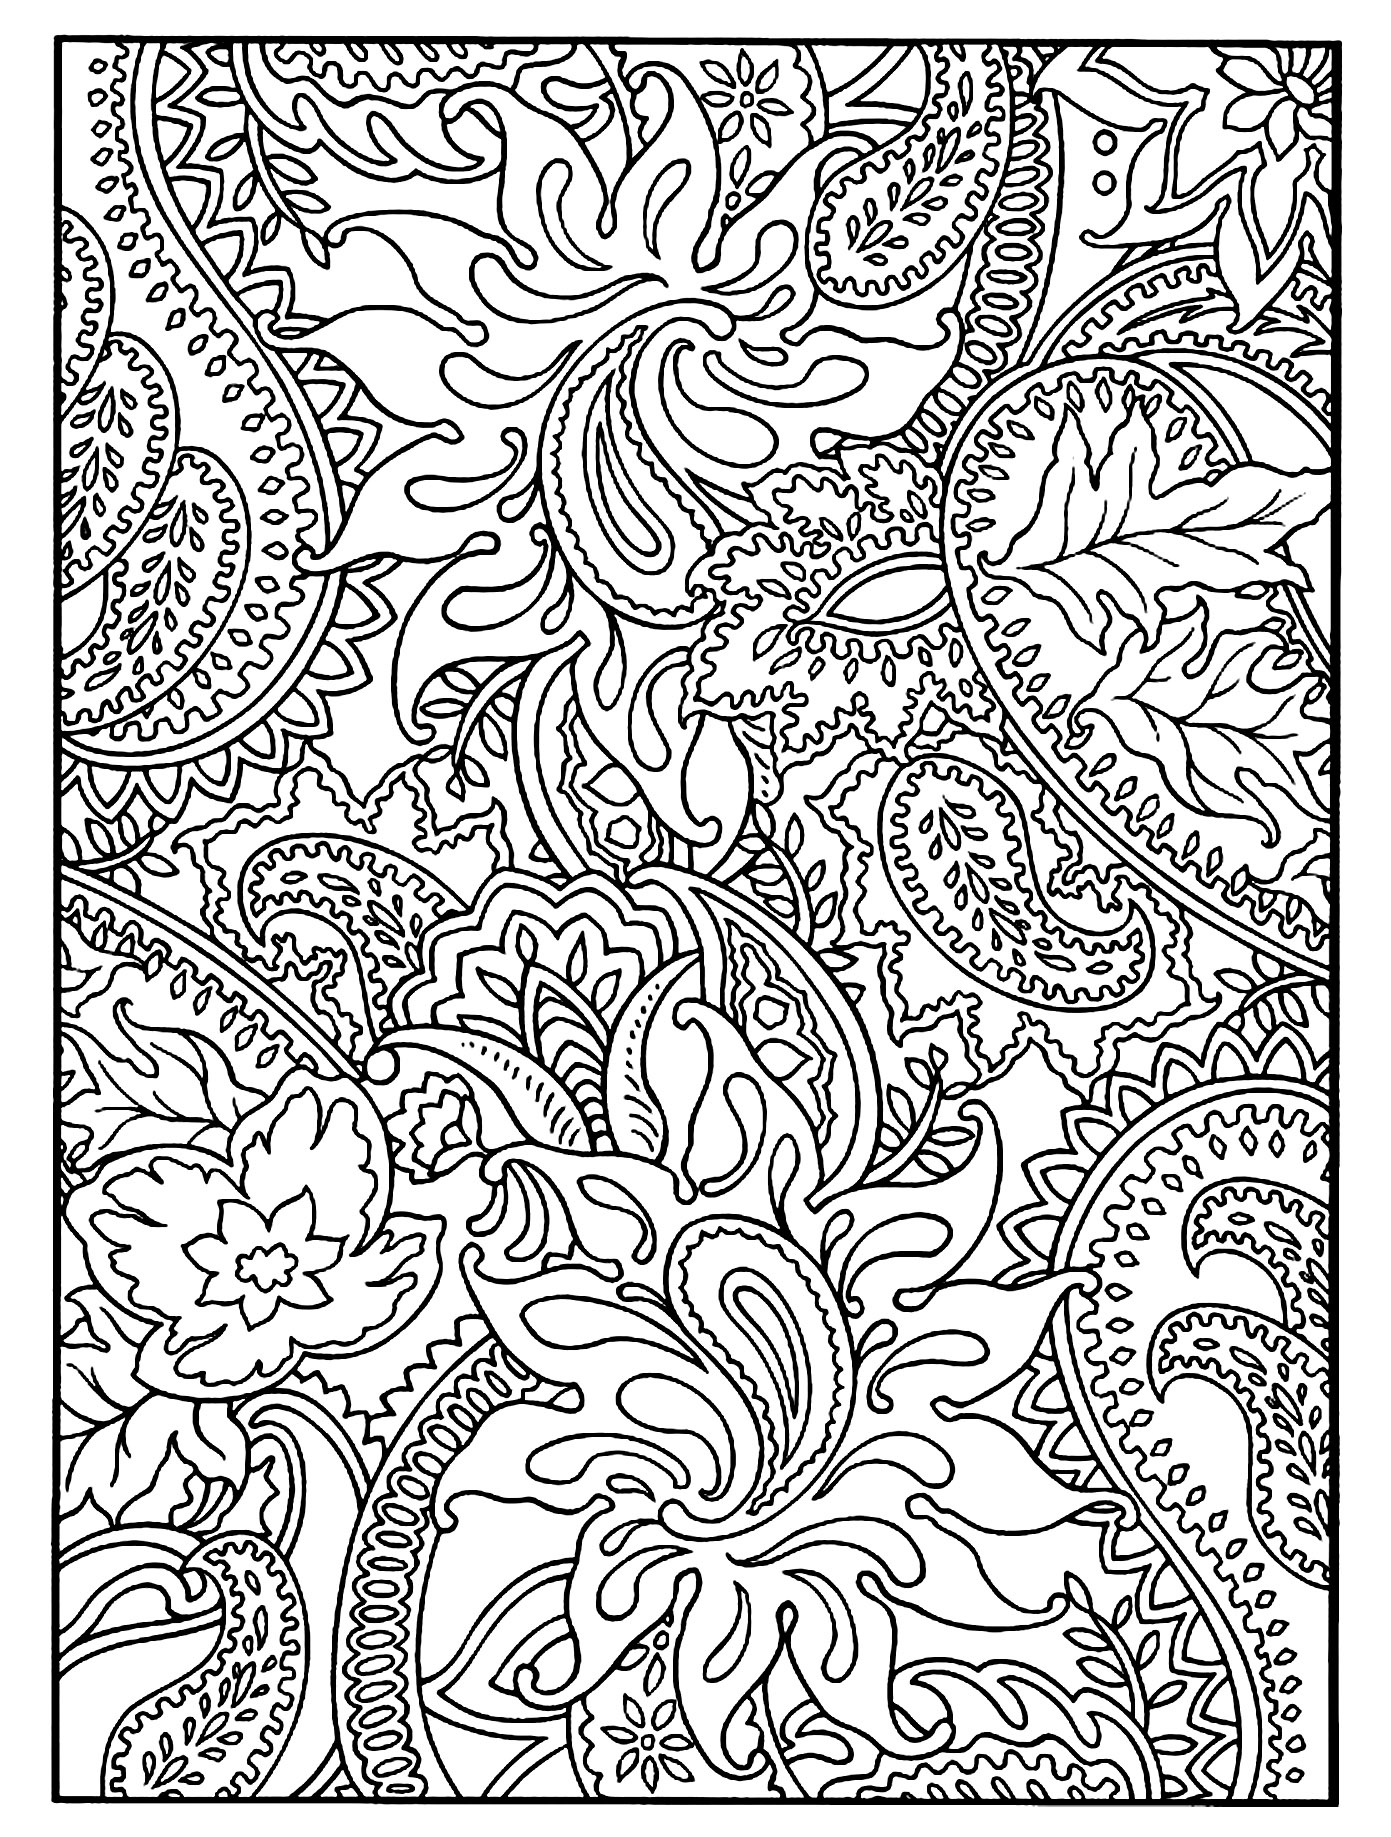 Flowers To Print - Flowers Adult Coloring Pages